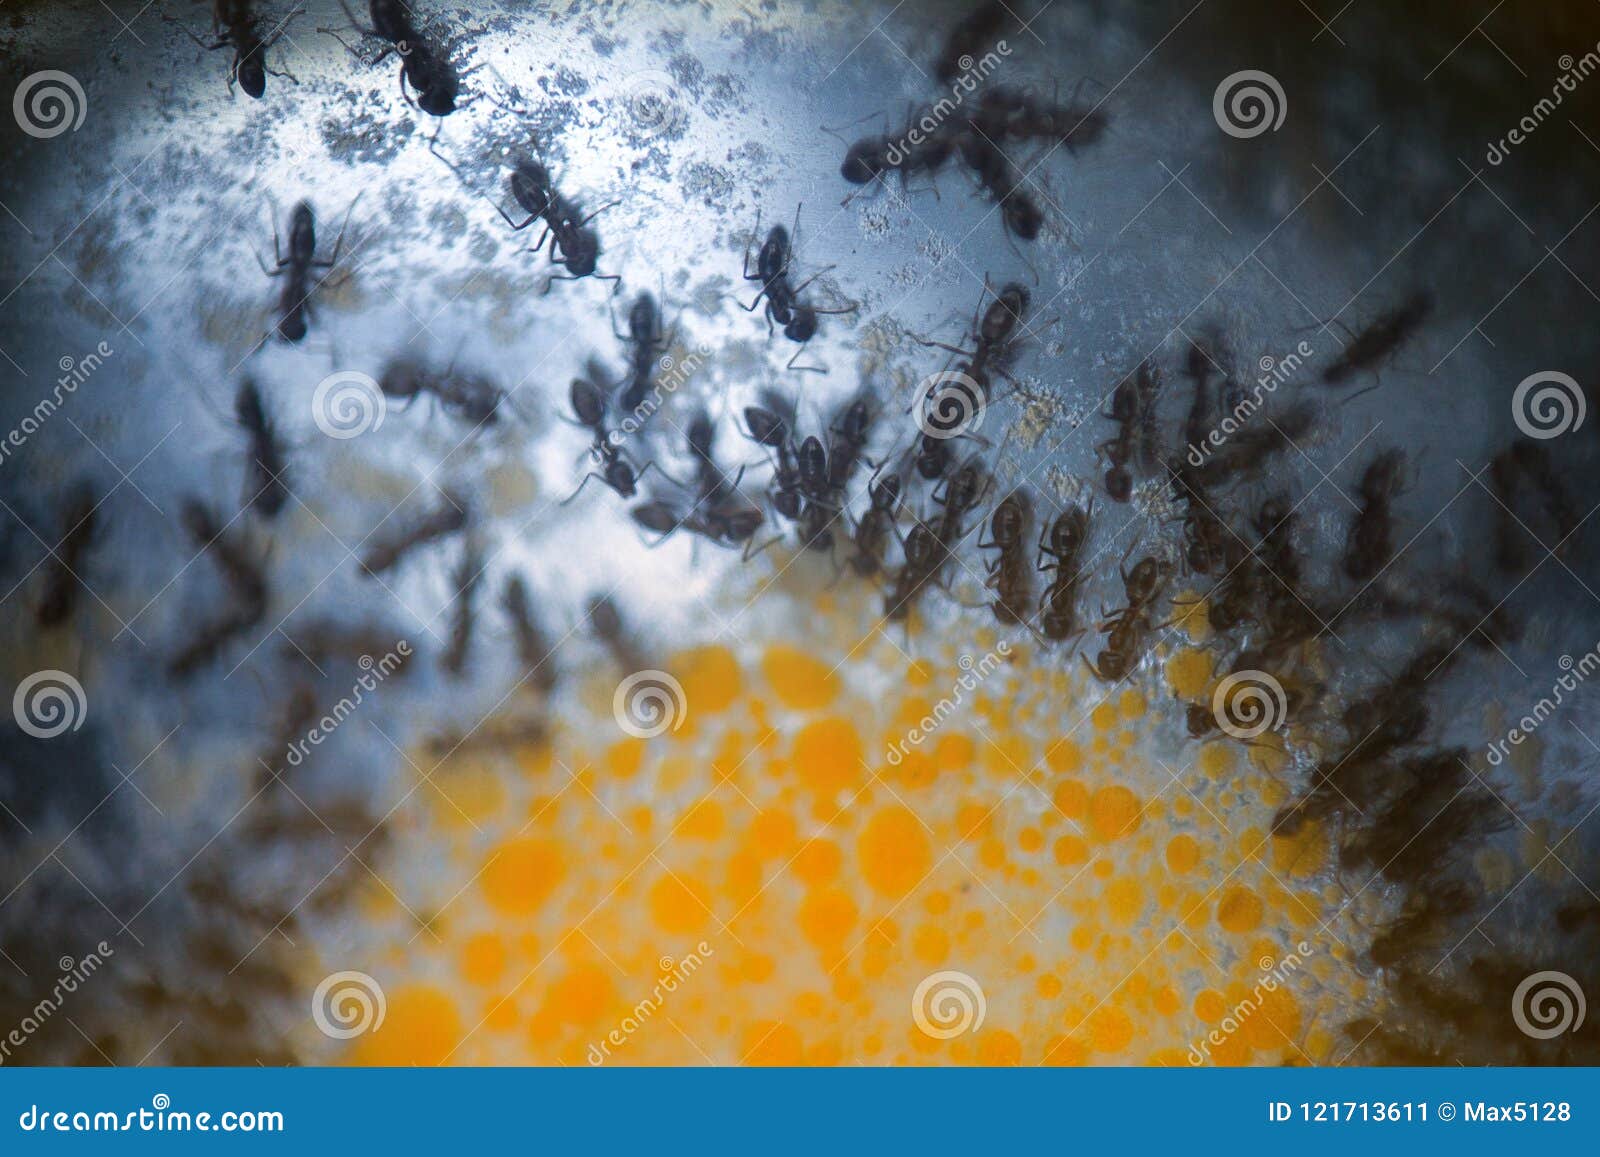 Ants Crowded Around Sweet Spot of Jam Stock Afbeelding - Image of ...